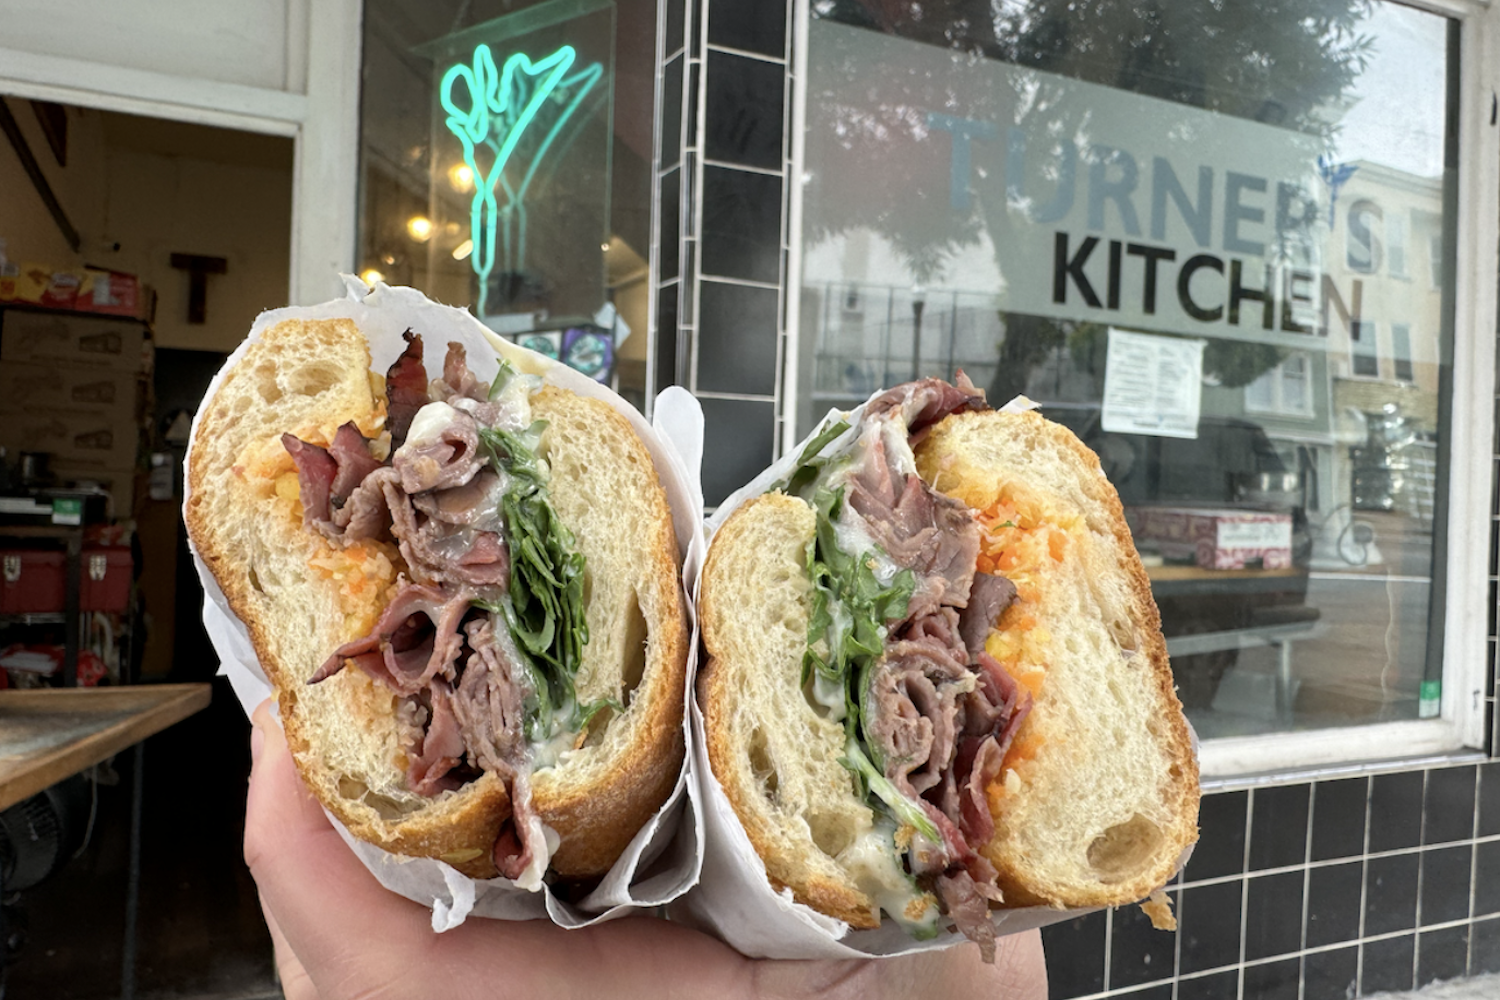 Turner's "Barack Obama sandwich," including roast beef, garlic mayo, melted provolone, a touch of giardiniera, arugula and a cup of au jus